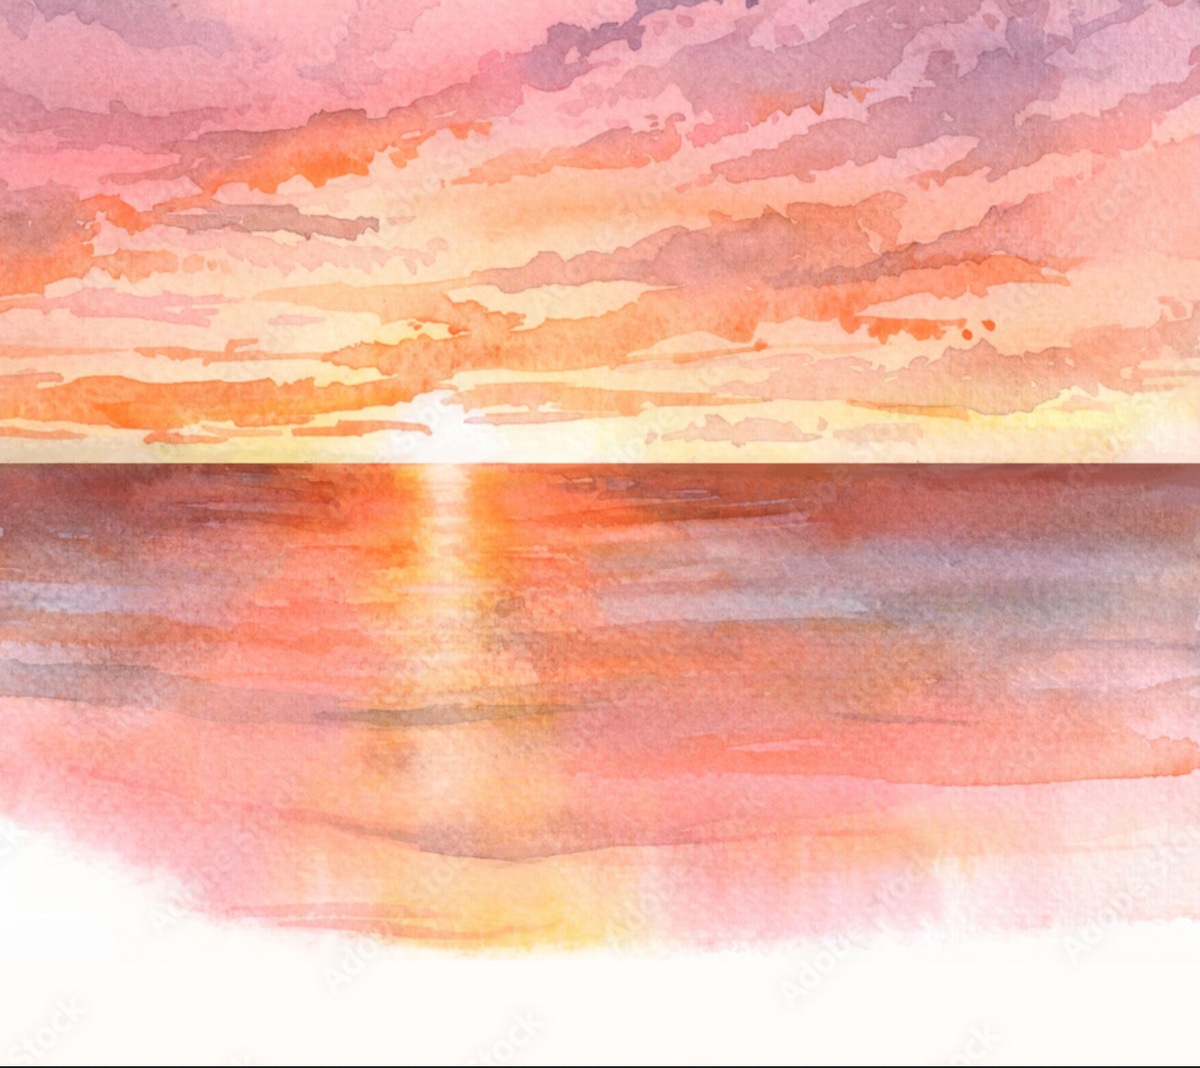 Introduction to Watercolor - A Meditative Journey, Adults, Wednesdays, 7-9 pm